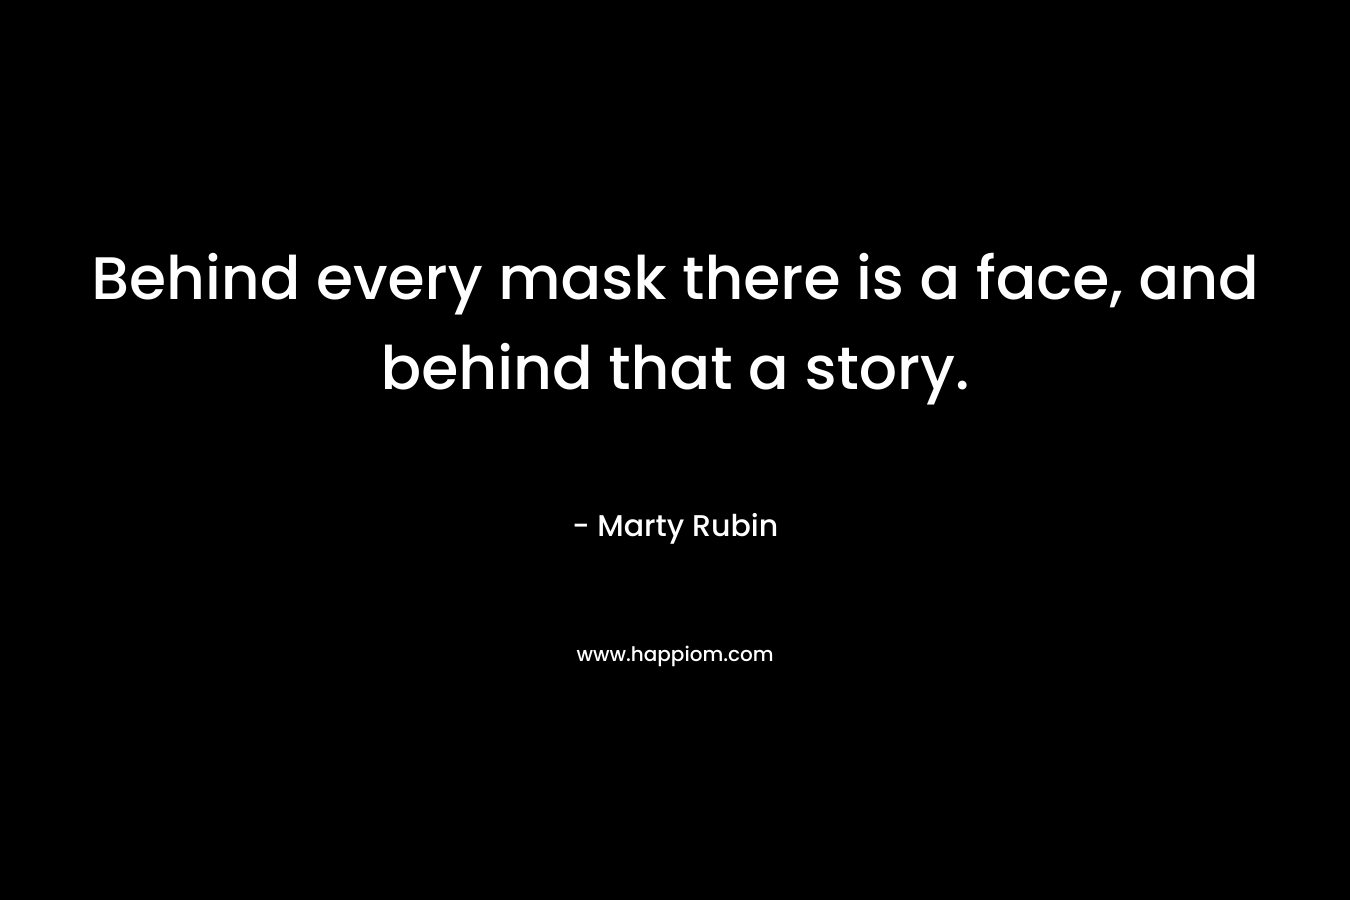 Behind every mask there is a face, and behind that a story.